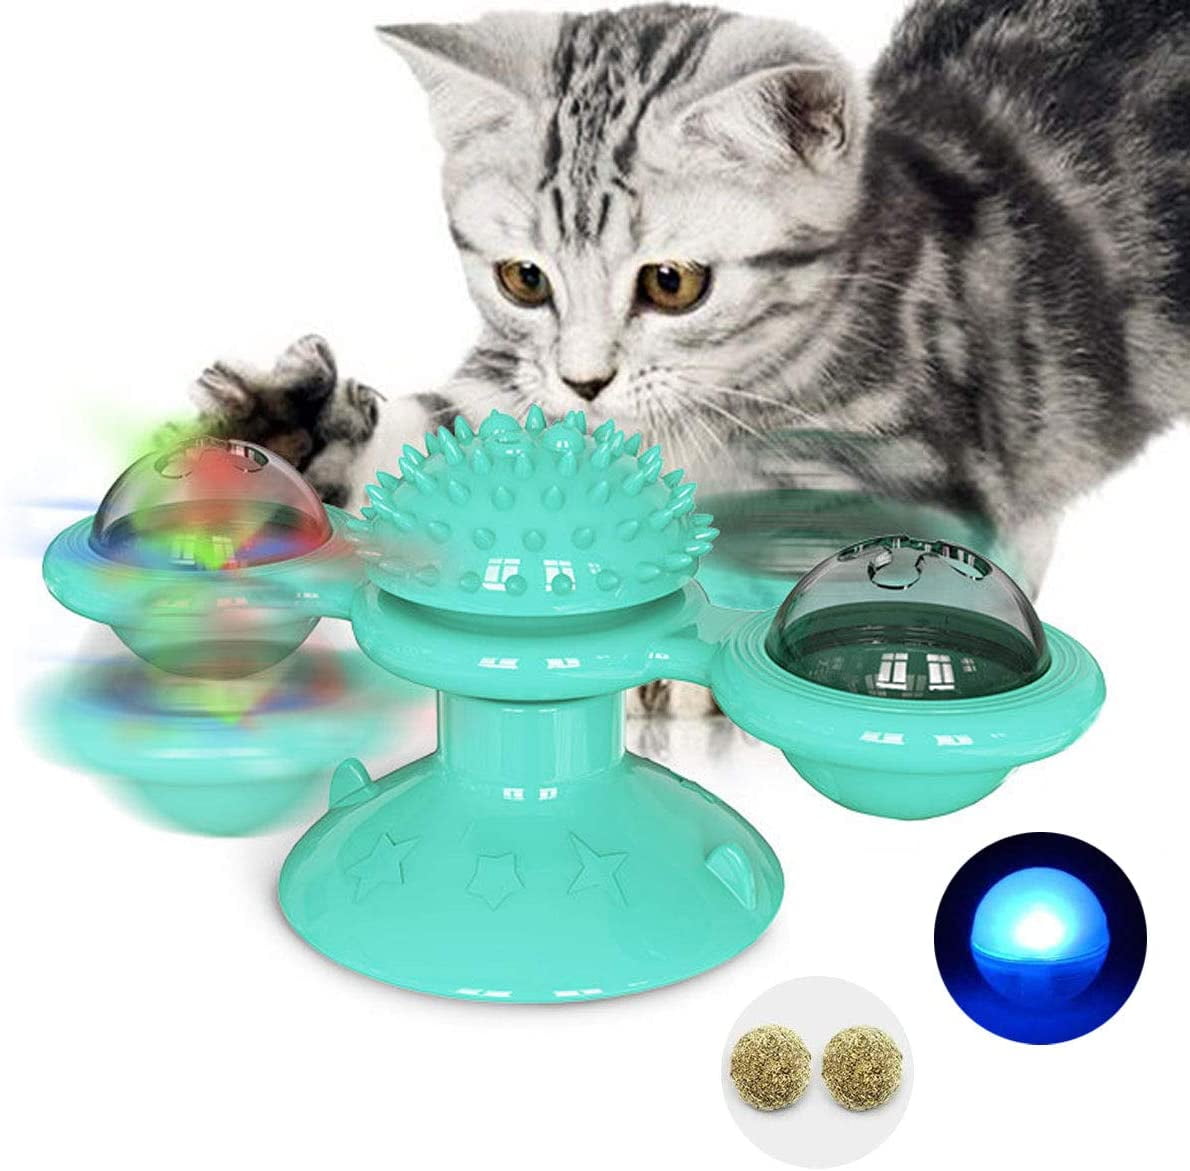 3 Pieces Windmill Cat Toy Interactive Cat Funny Toy Portable Turntable Rotating Cat Toy Scratching Tickle Hair Brush with LED Ball and Catnip Ball for Cats Grooming Massaging 